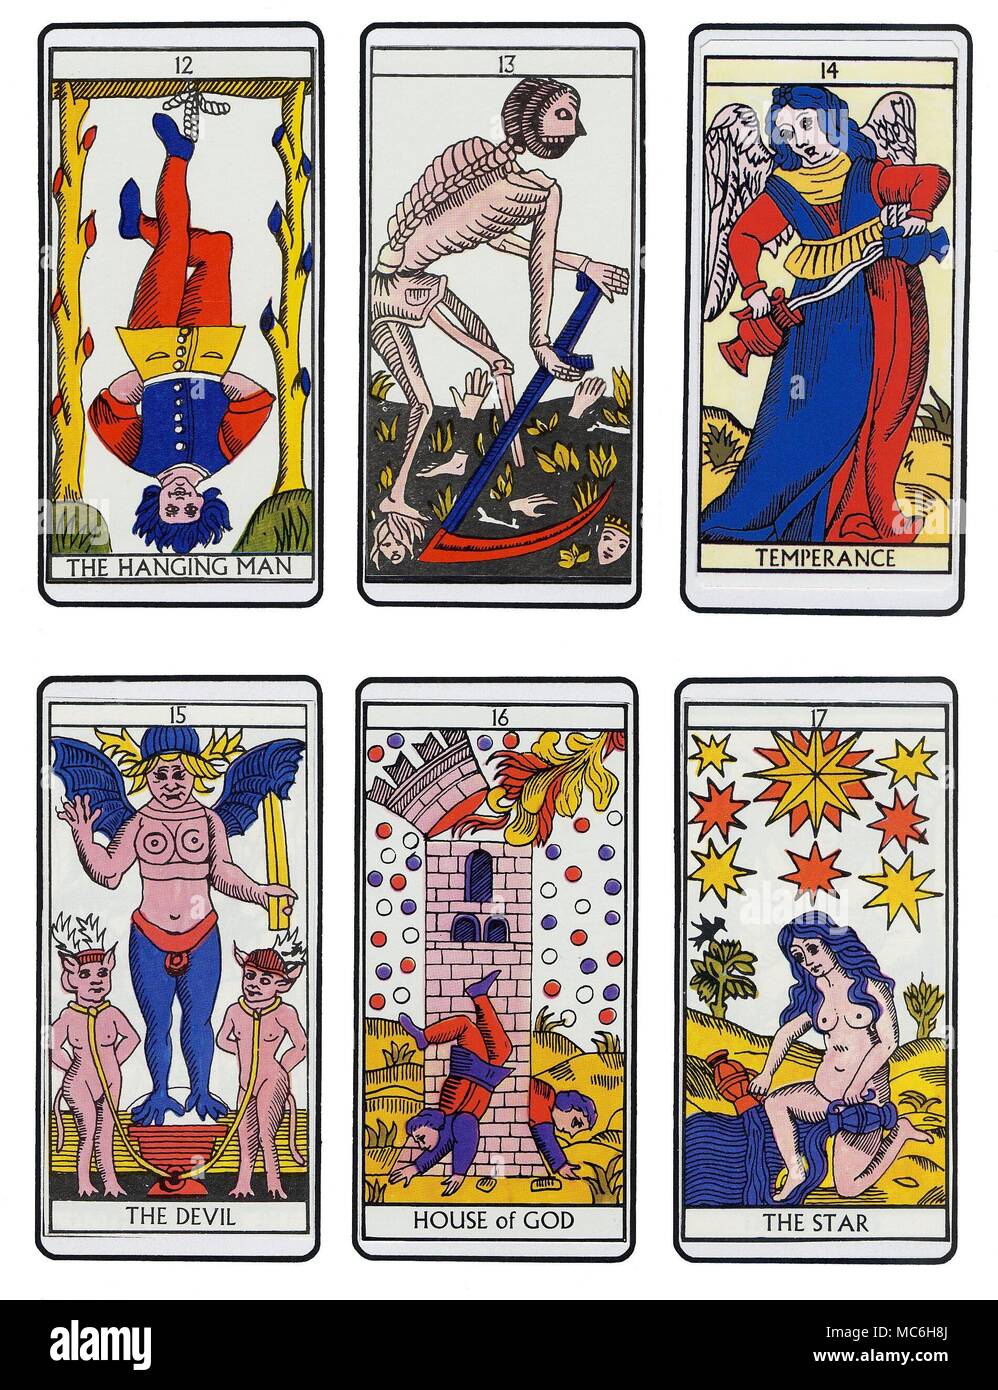 TAROT CARDS - MODERN MARSEILLES DECK Six cards from a complete sequence of Tarot cards in the Marseilles tradition. Top, from left to right - The Hanging Man, the unnamed Death card, Temperance, The Devil, House of God and The Star. Stock Photo